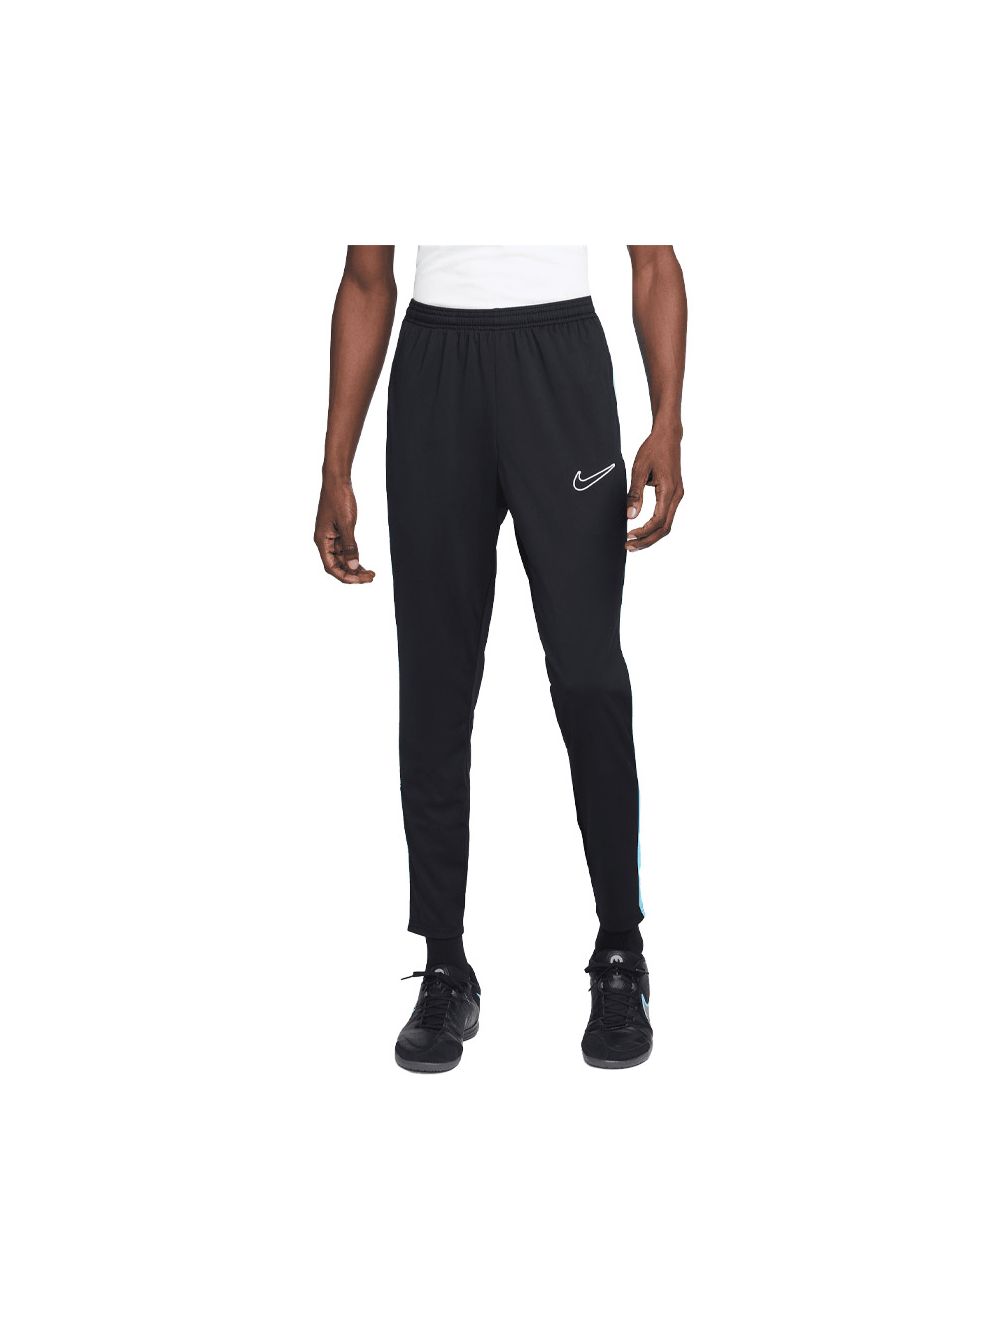 Stay comfortable and stylish with NIKE Dri-Fit Training Pants